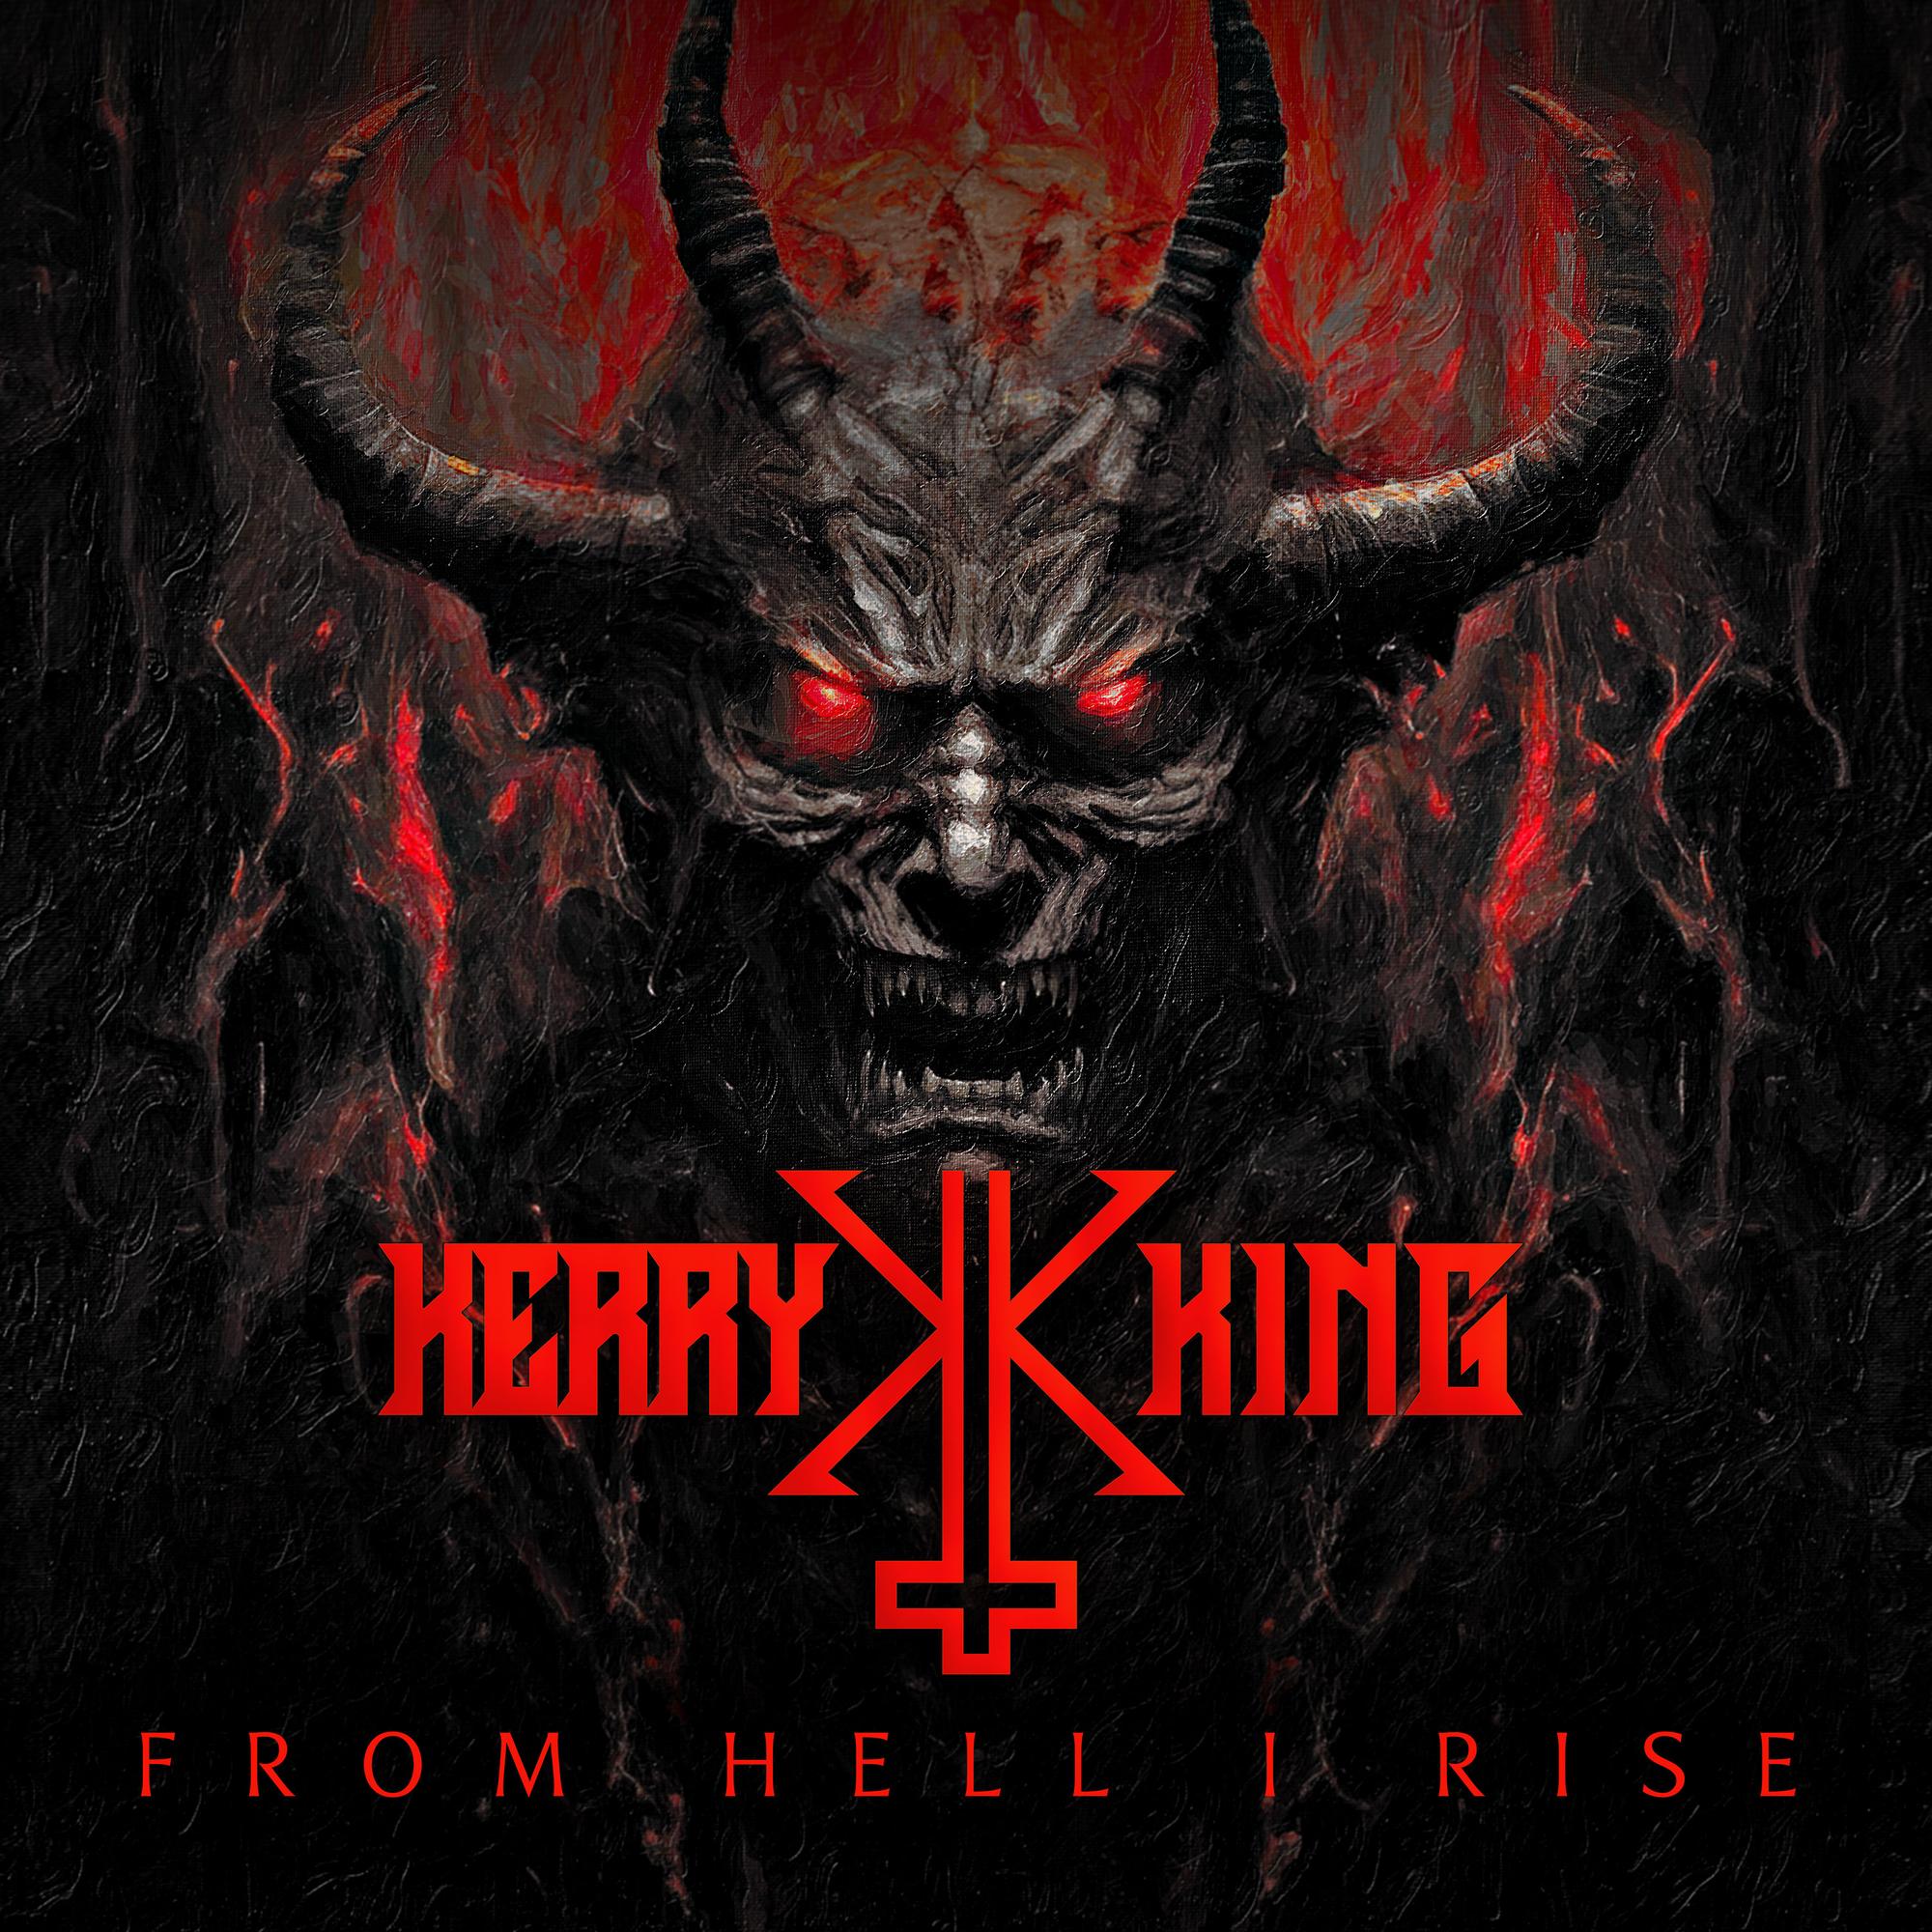 Kerry King "From Hell I Rise" Red / Orange Marble Vinyl